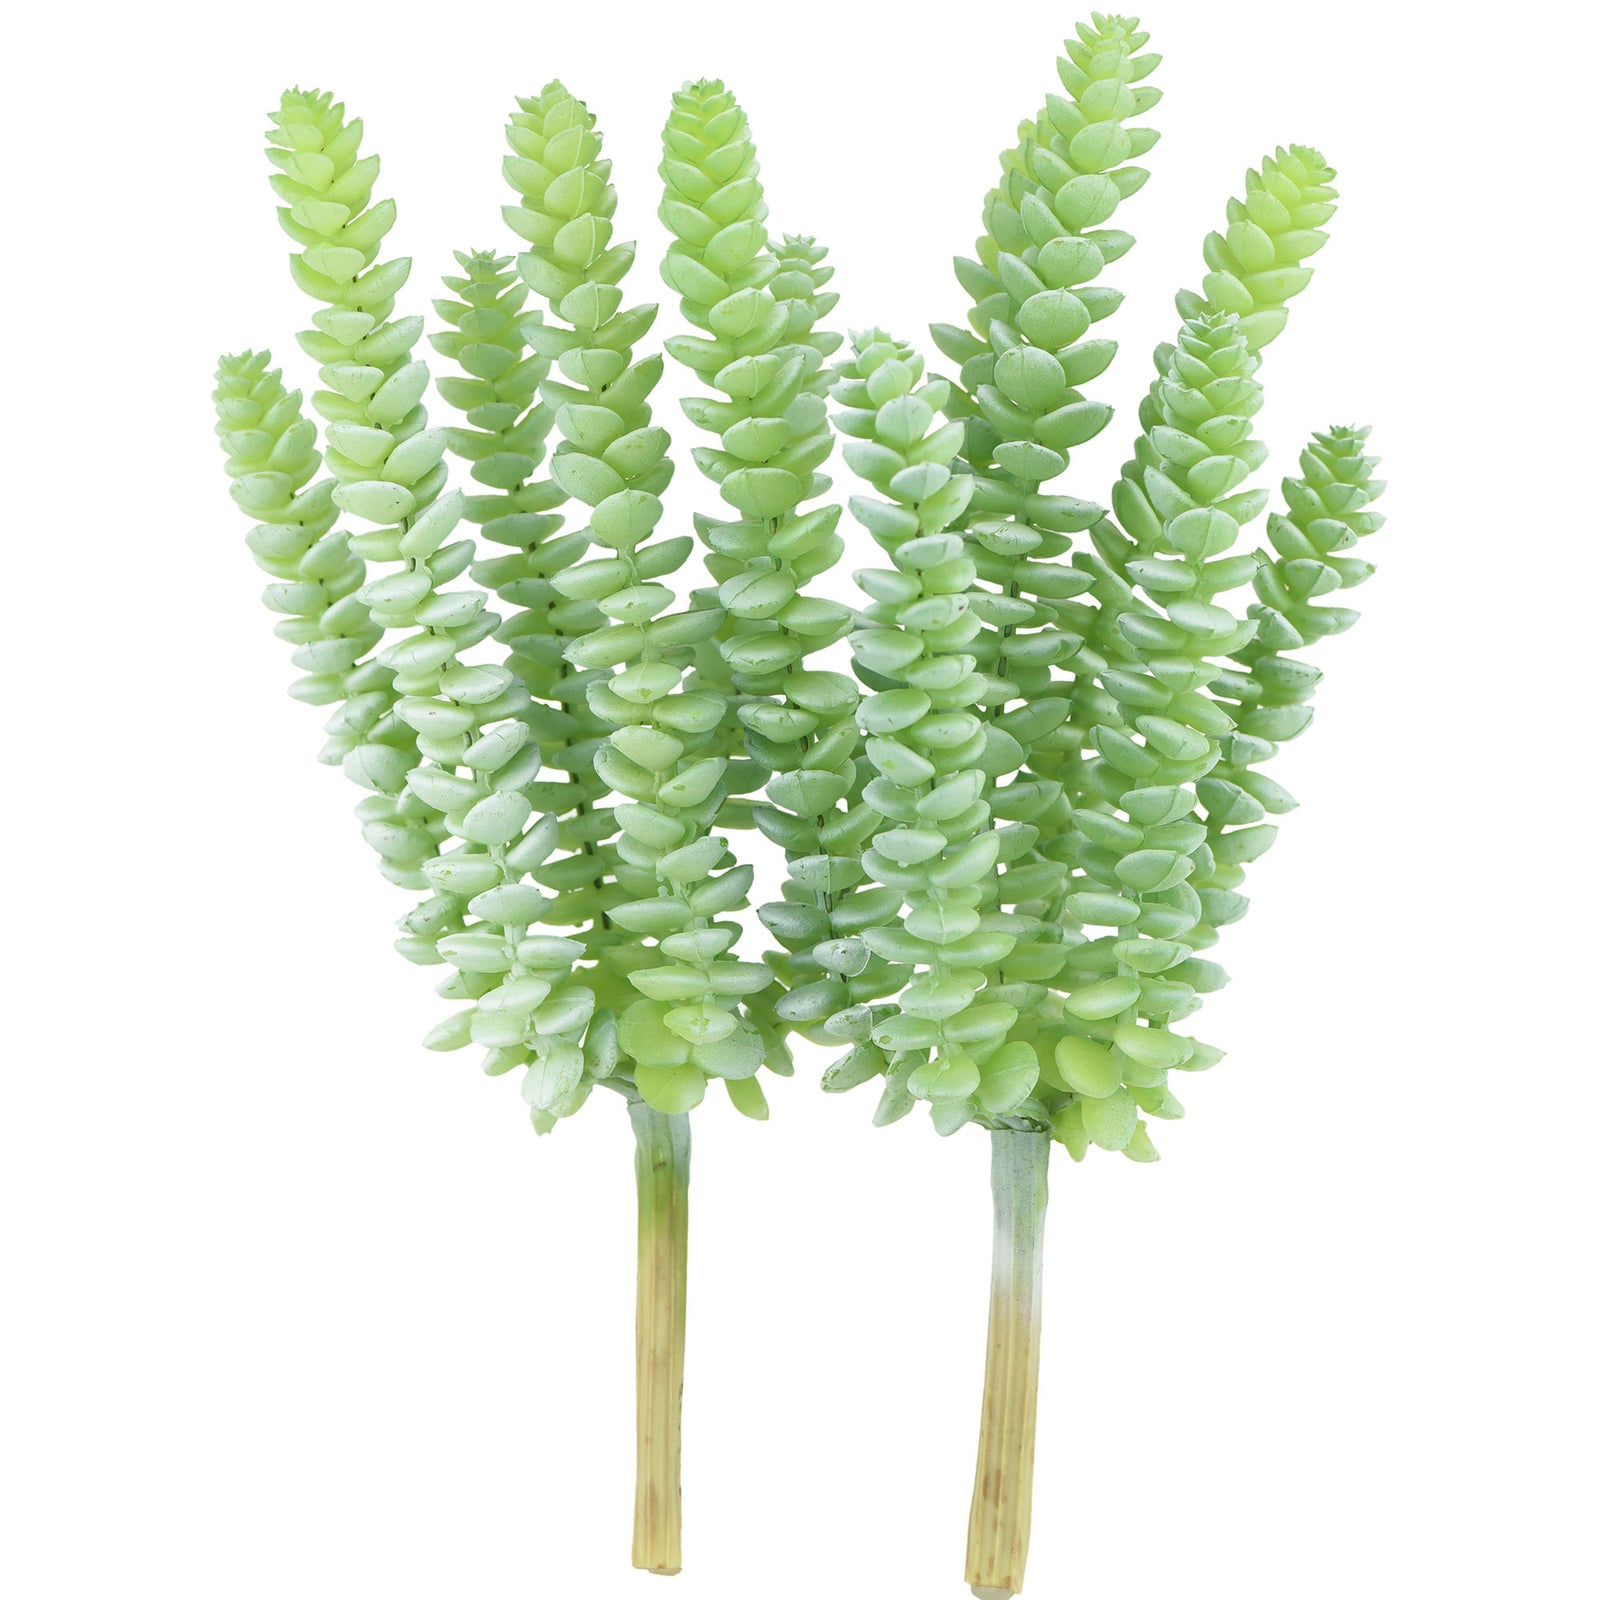 2 Stems Realistic-Looking Artificial/Faux/Fake Succulent Unpotted Plant Bulk for Decoration, Gifts, DIY (Green)